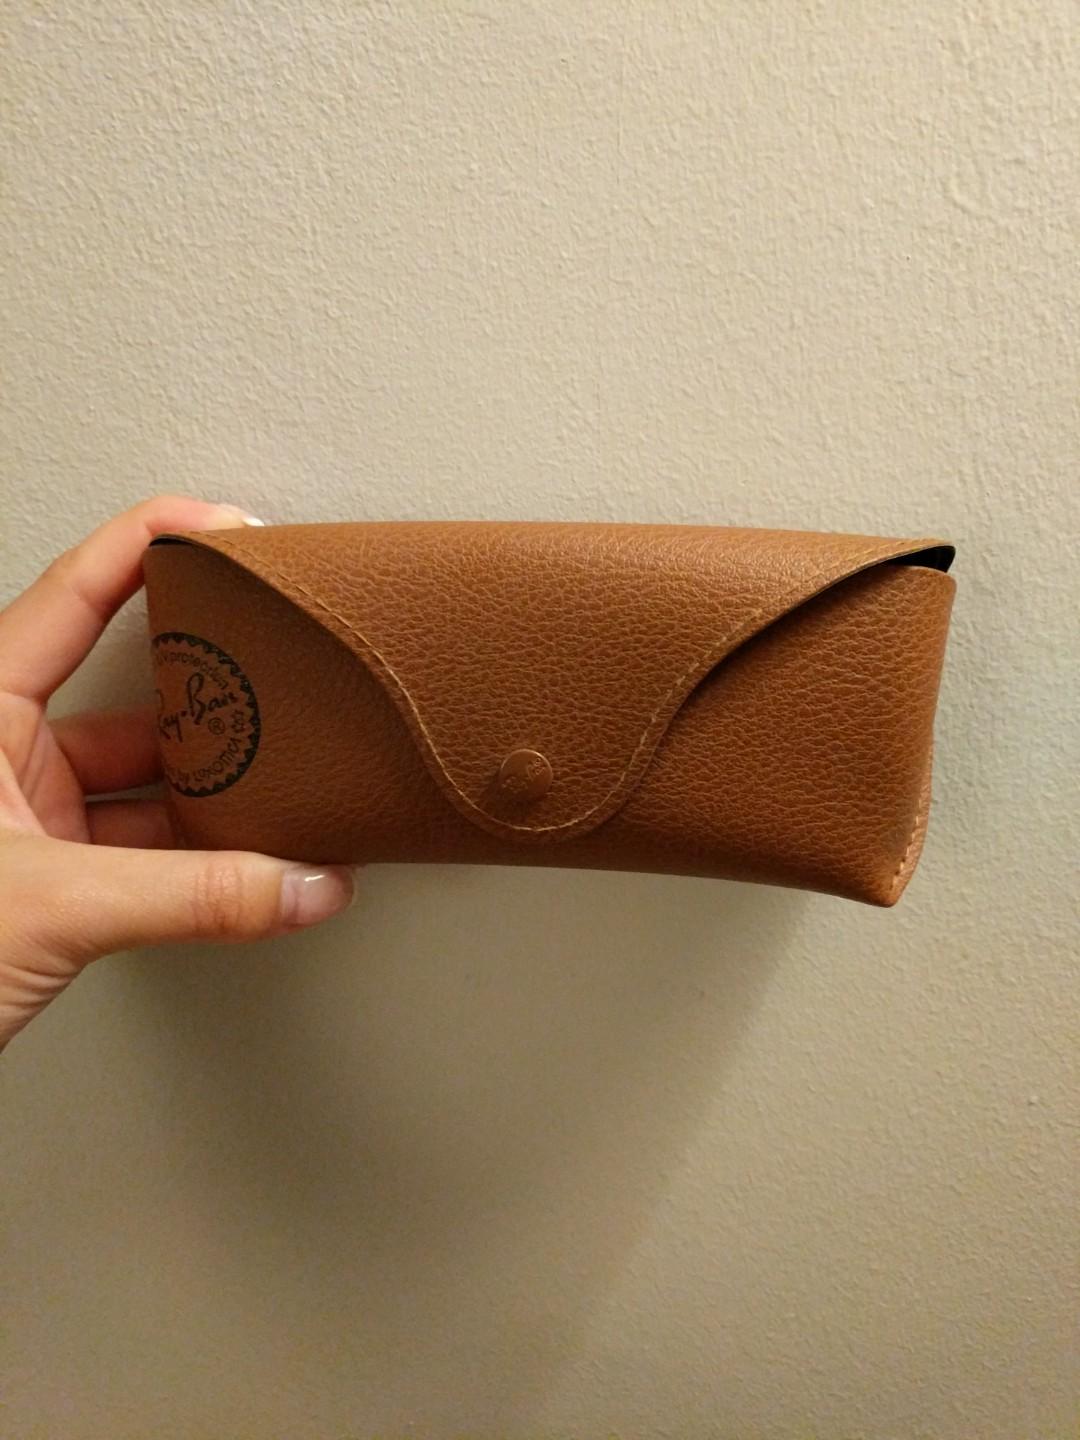 ray ban sunglasses pouch